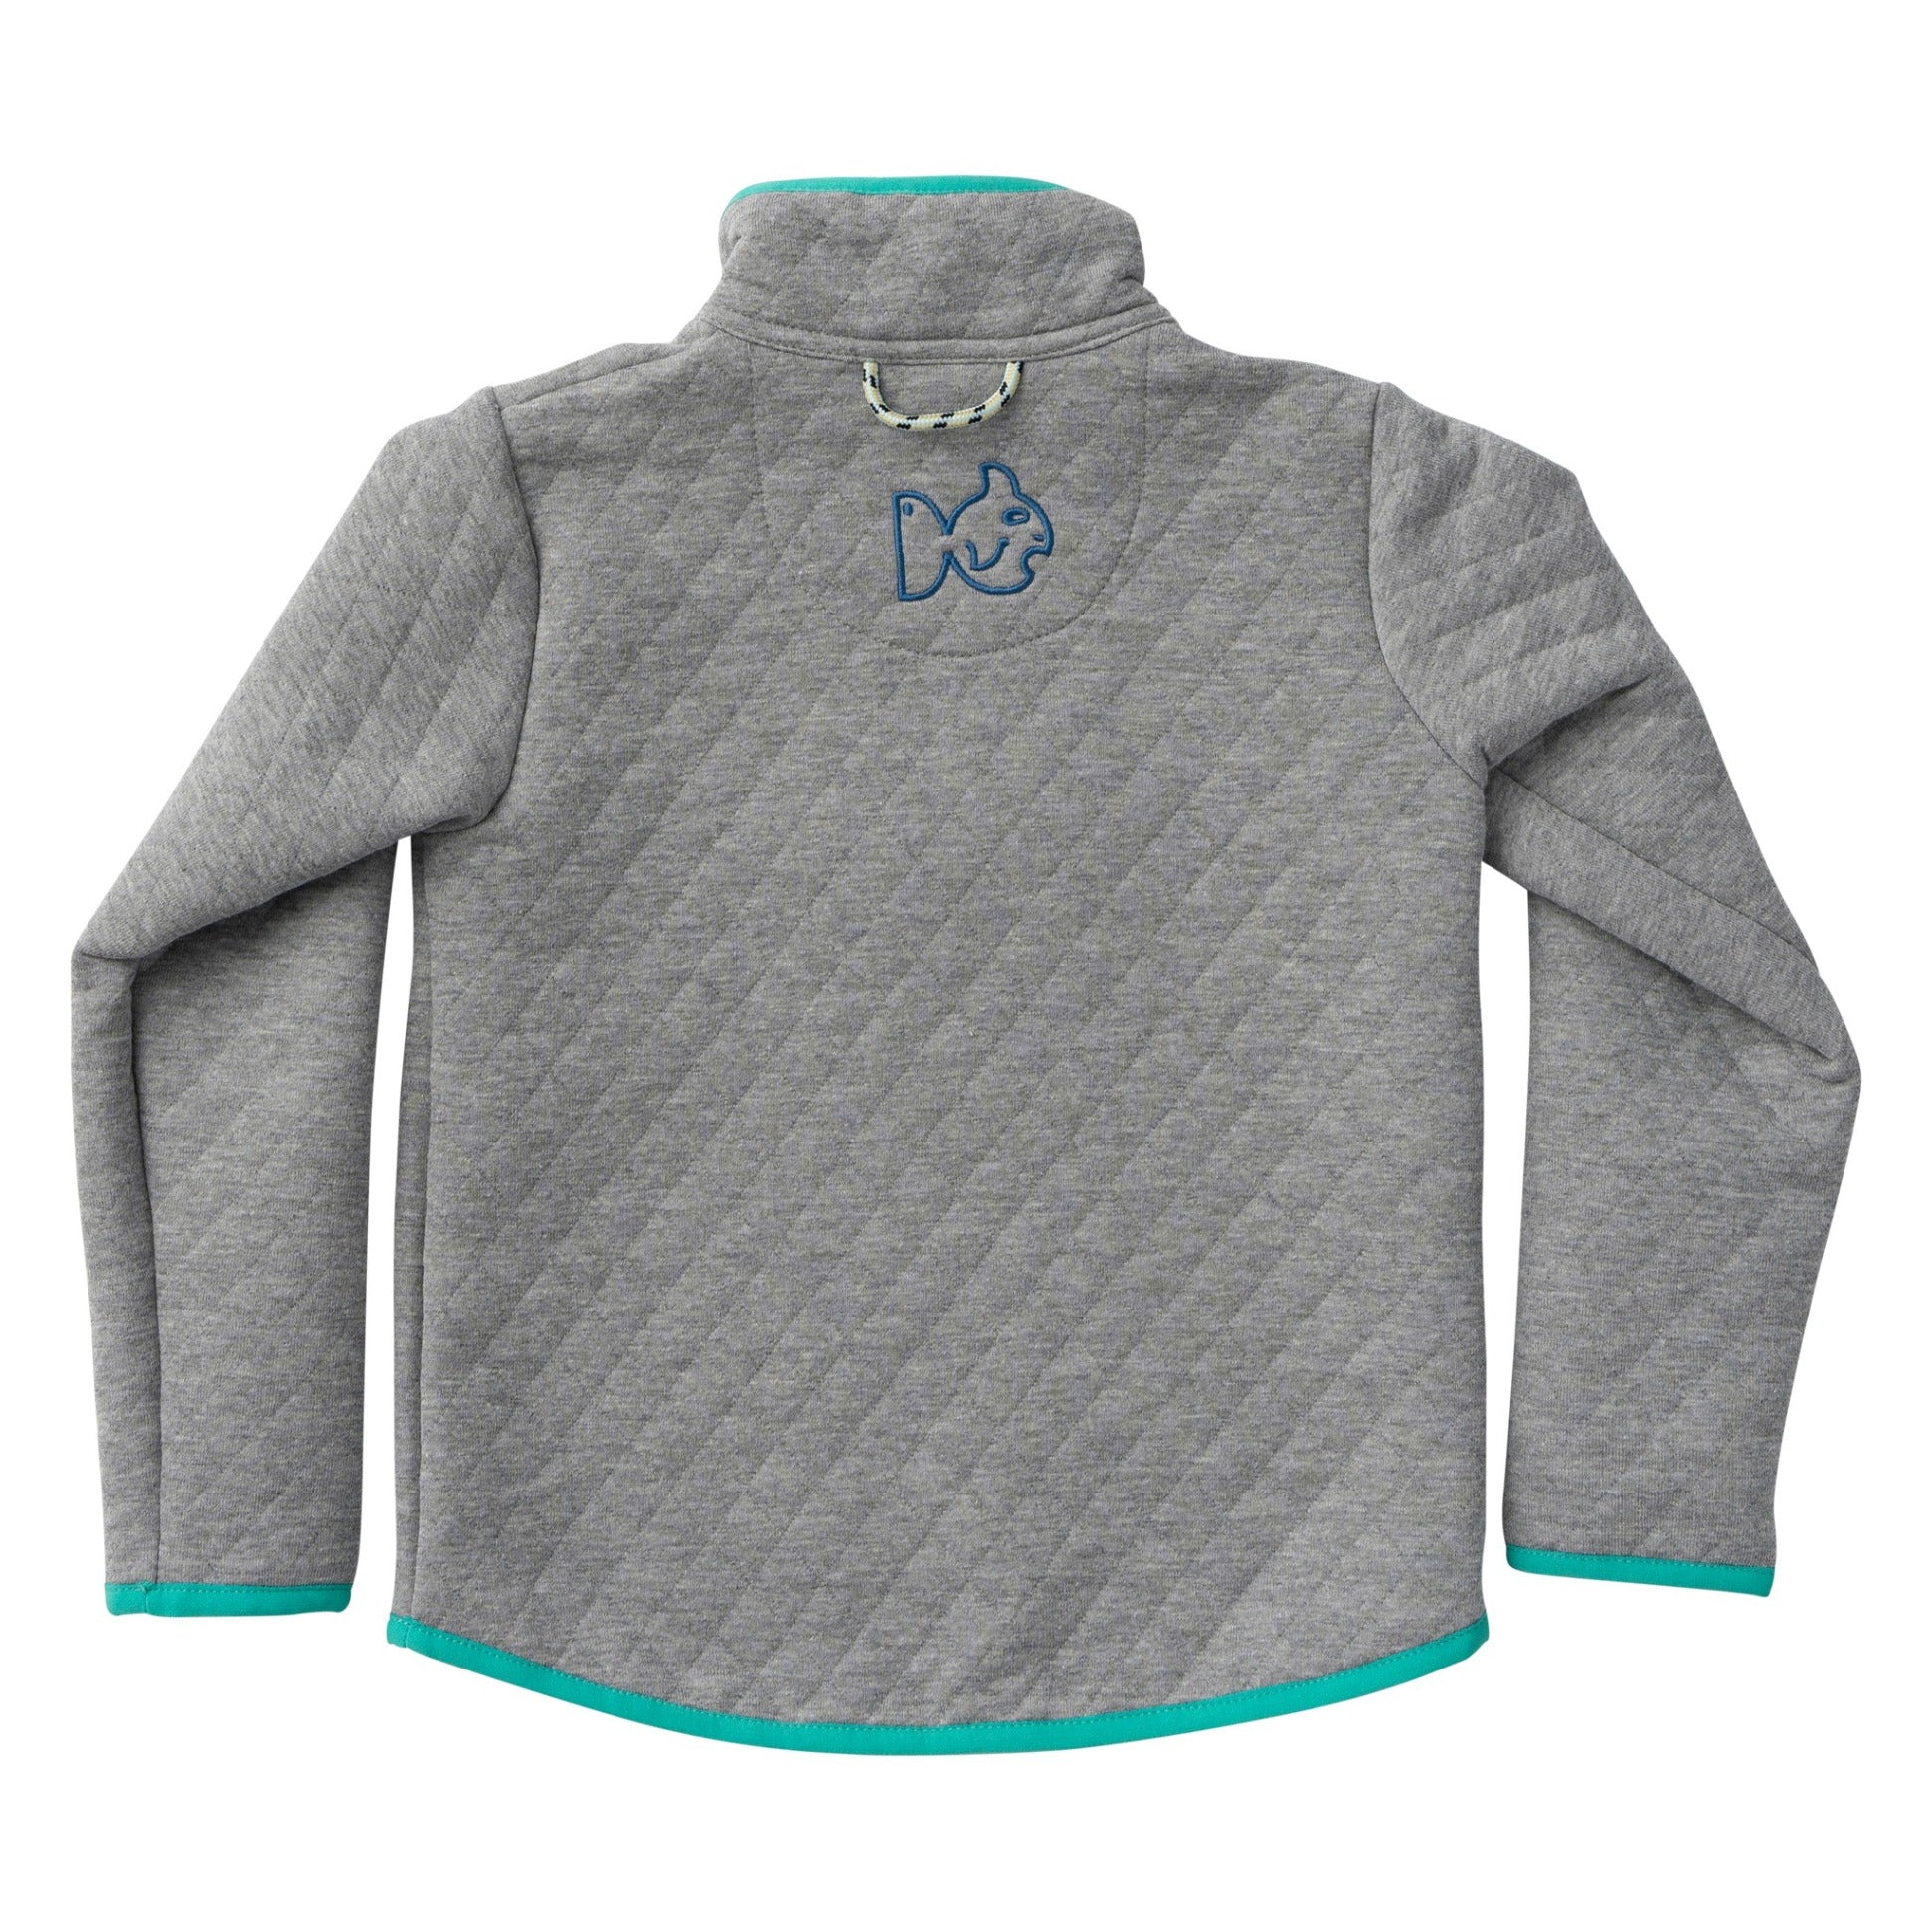 Quilted Zip Pullover - Heather Gray (2T-8/10)